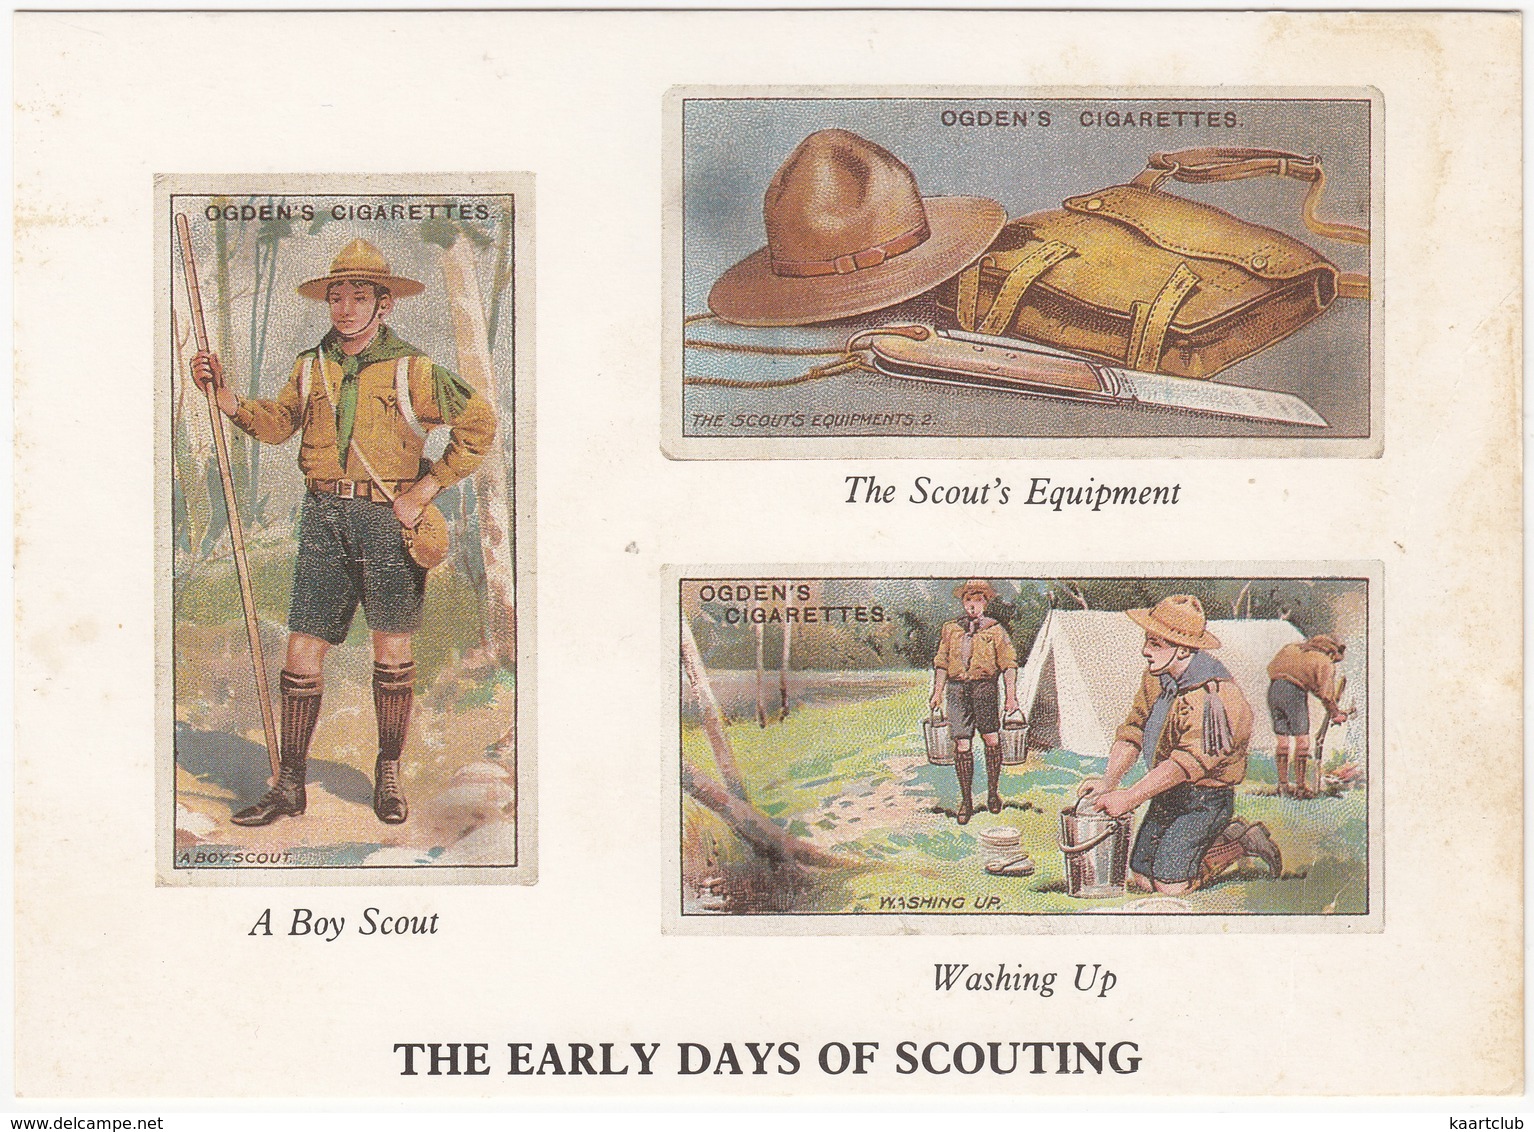 SCOUTING: 'The Early Days Of Scouting' - 3x Ogden's Cigarettes: BOY SCOUT, Equipment, Washing Up - (Delpool Postcard) - Padvinderij